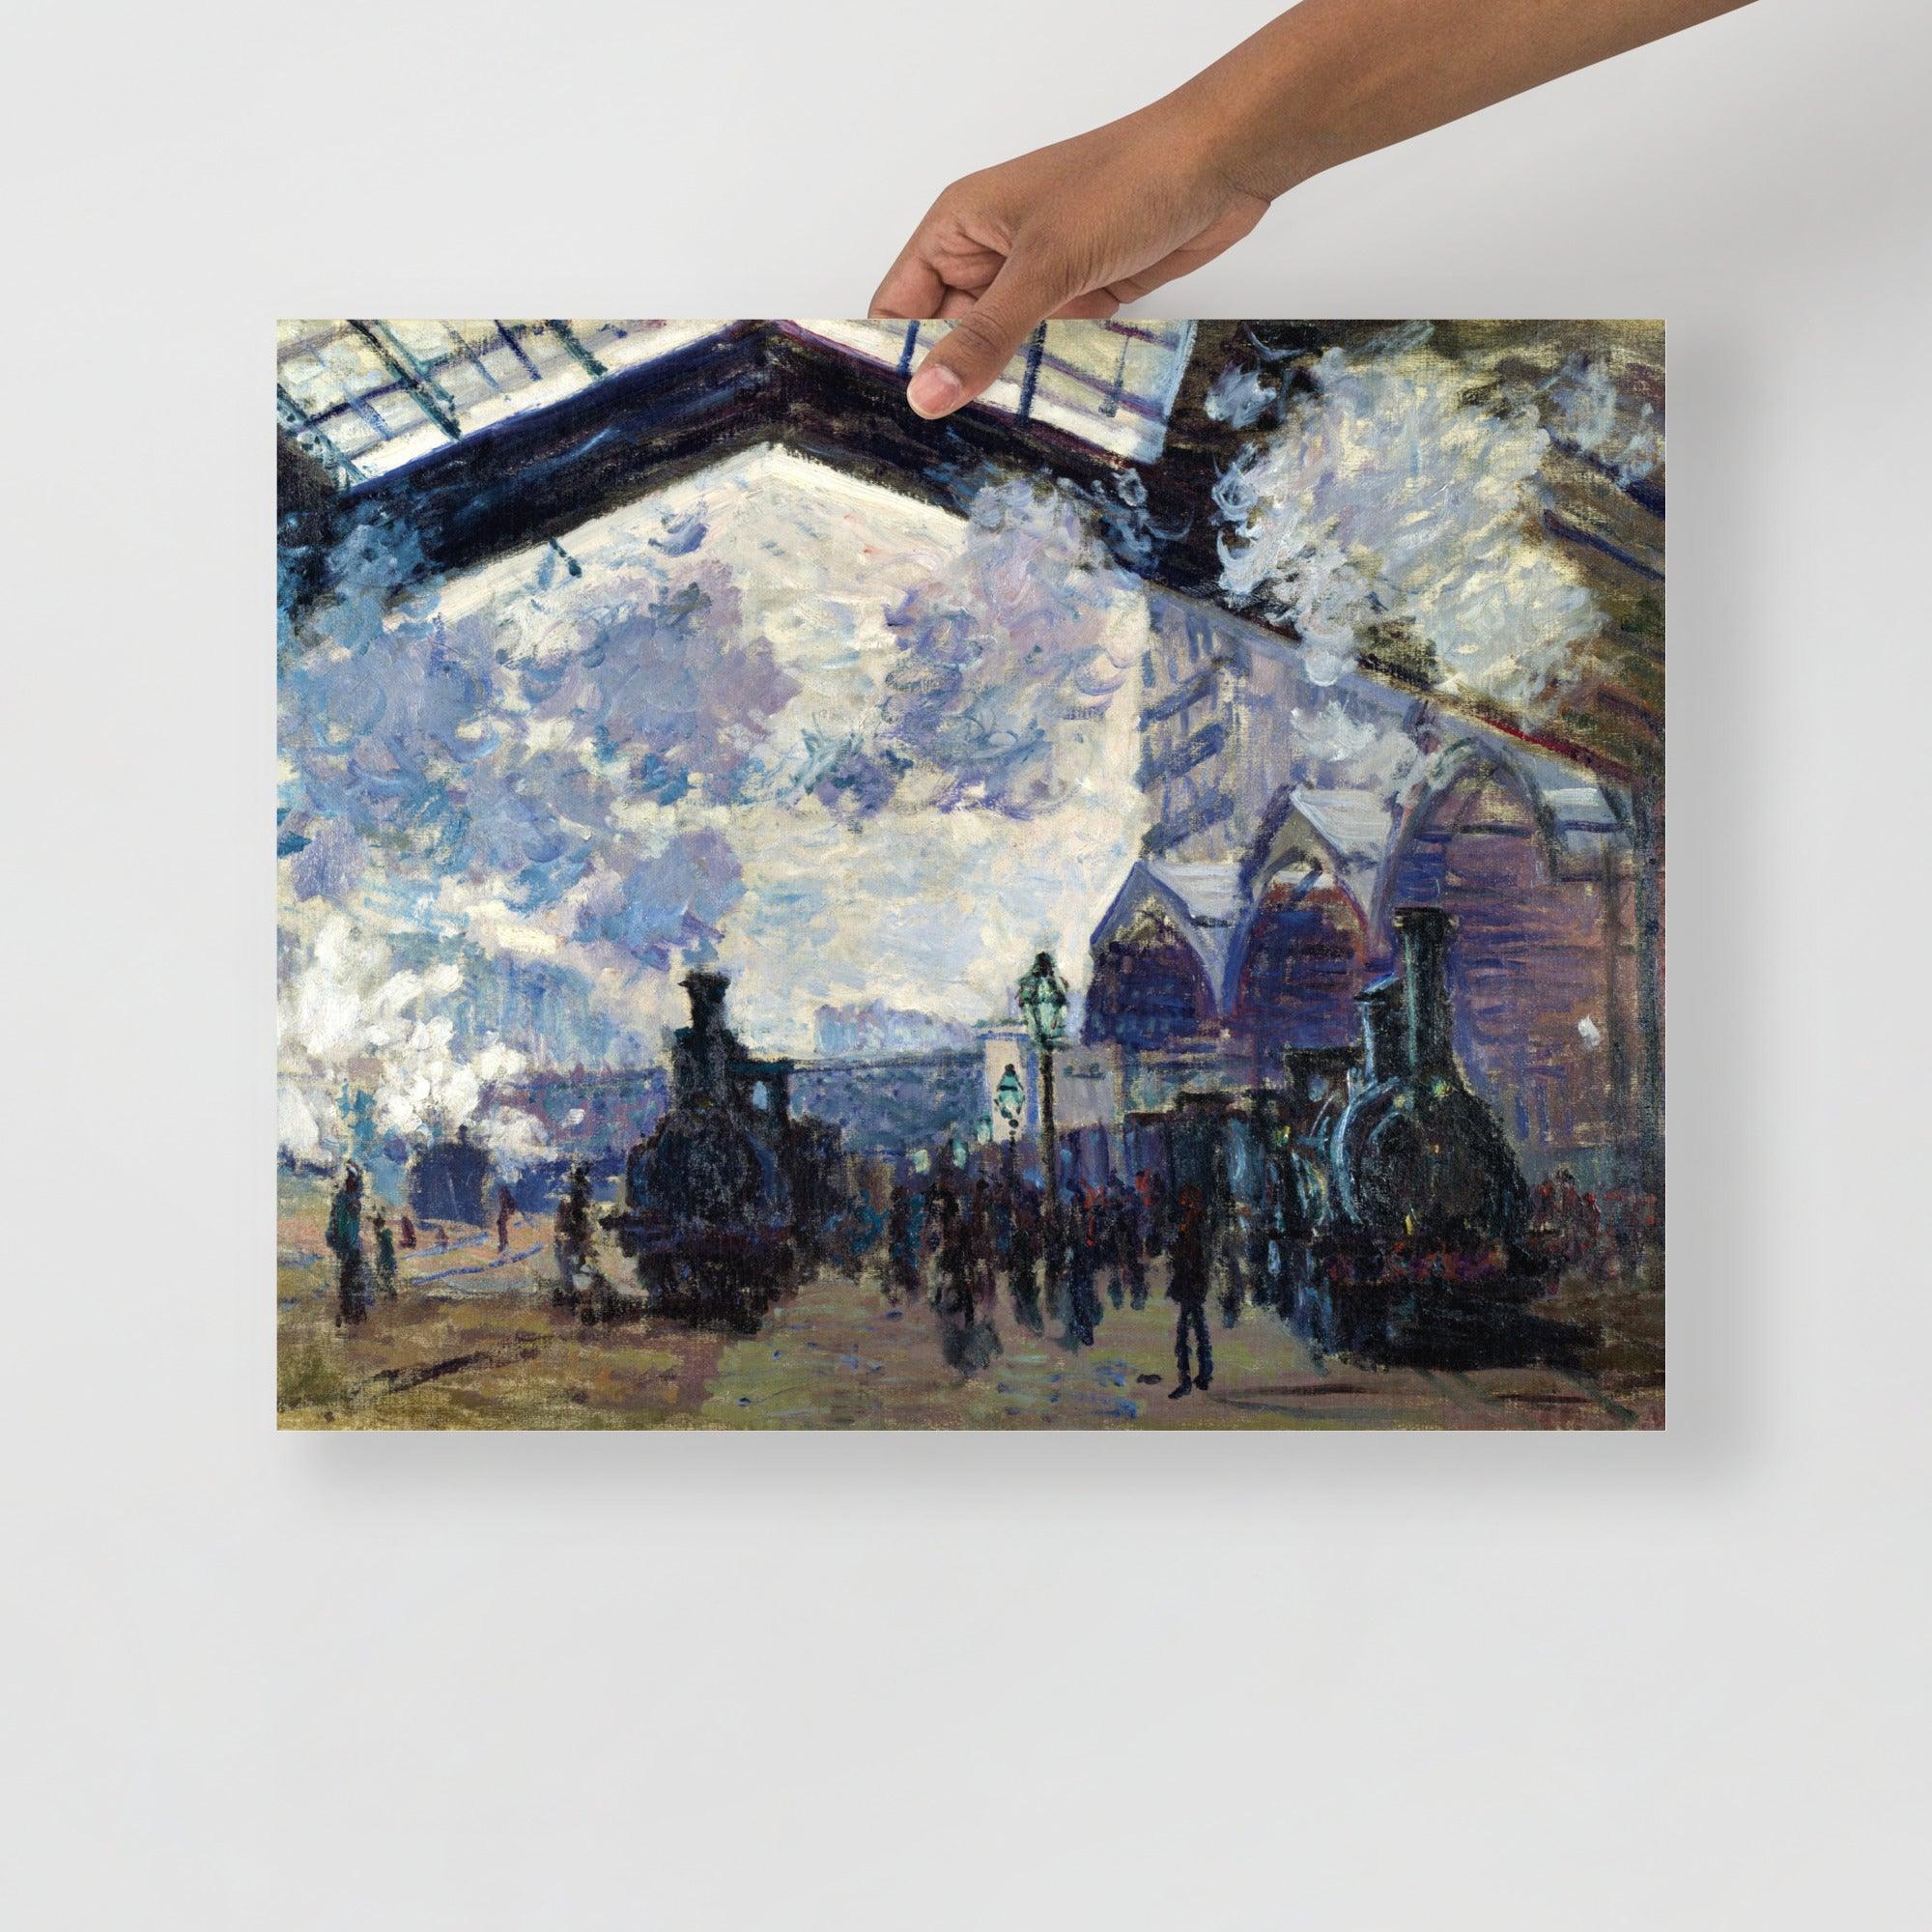 The Gare St-Lazare by Claude Monet  poster on a plain backdrop in size 16x20”.